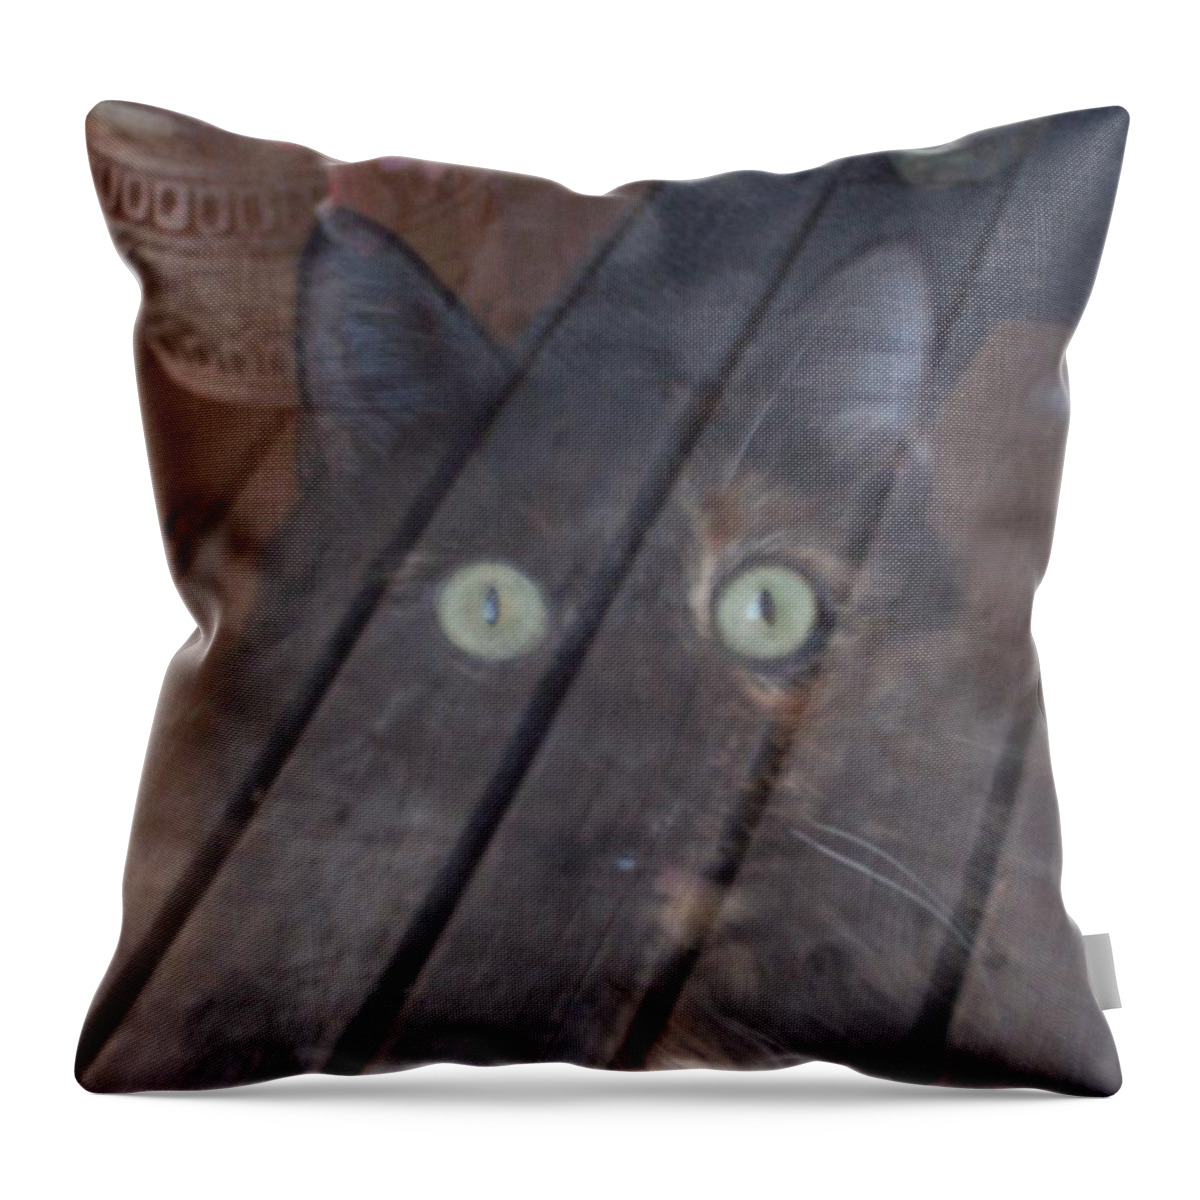 Cat Throw Pillow featuring the photograph Ghostly by Susan Turner Soulis